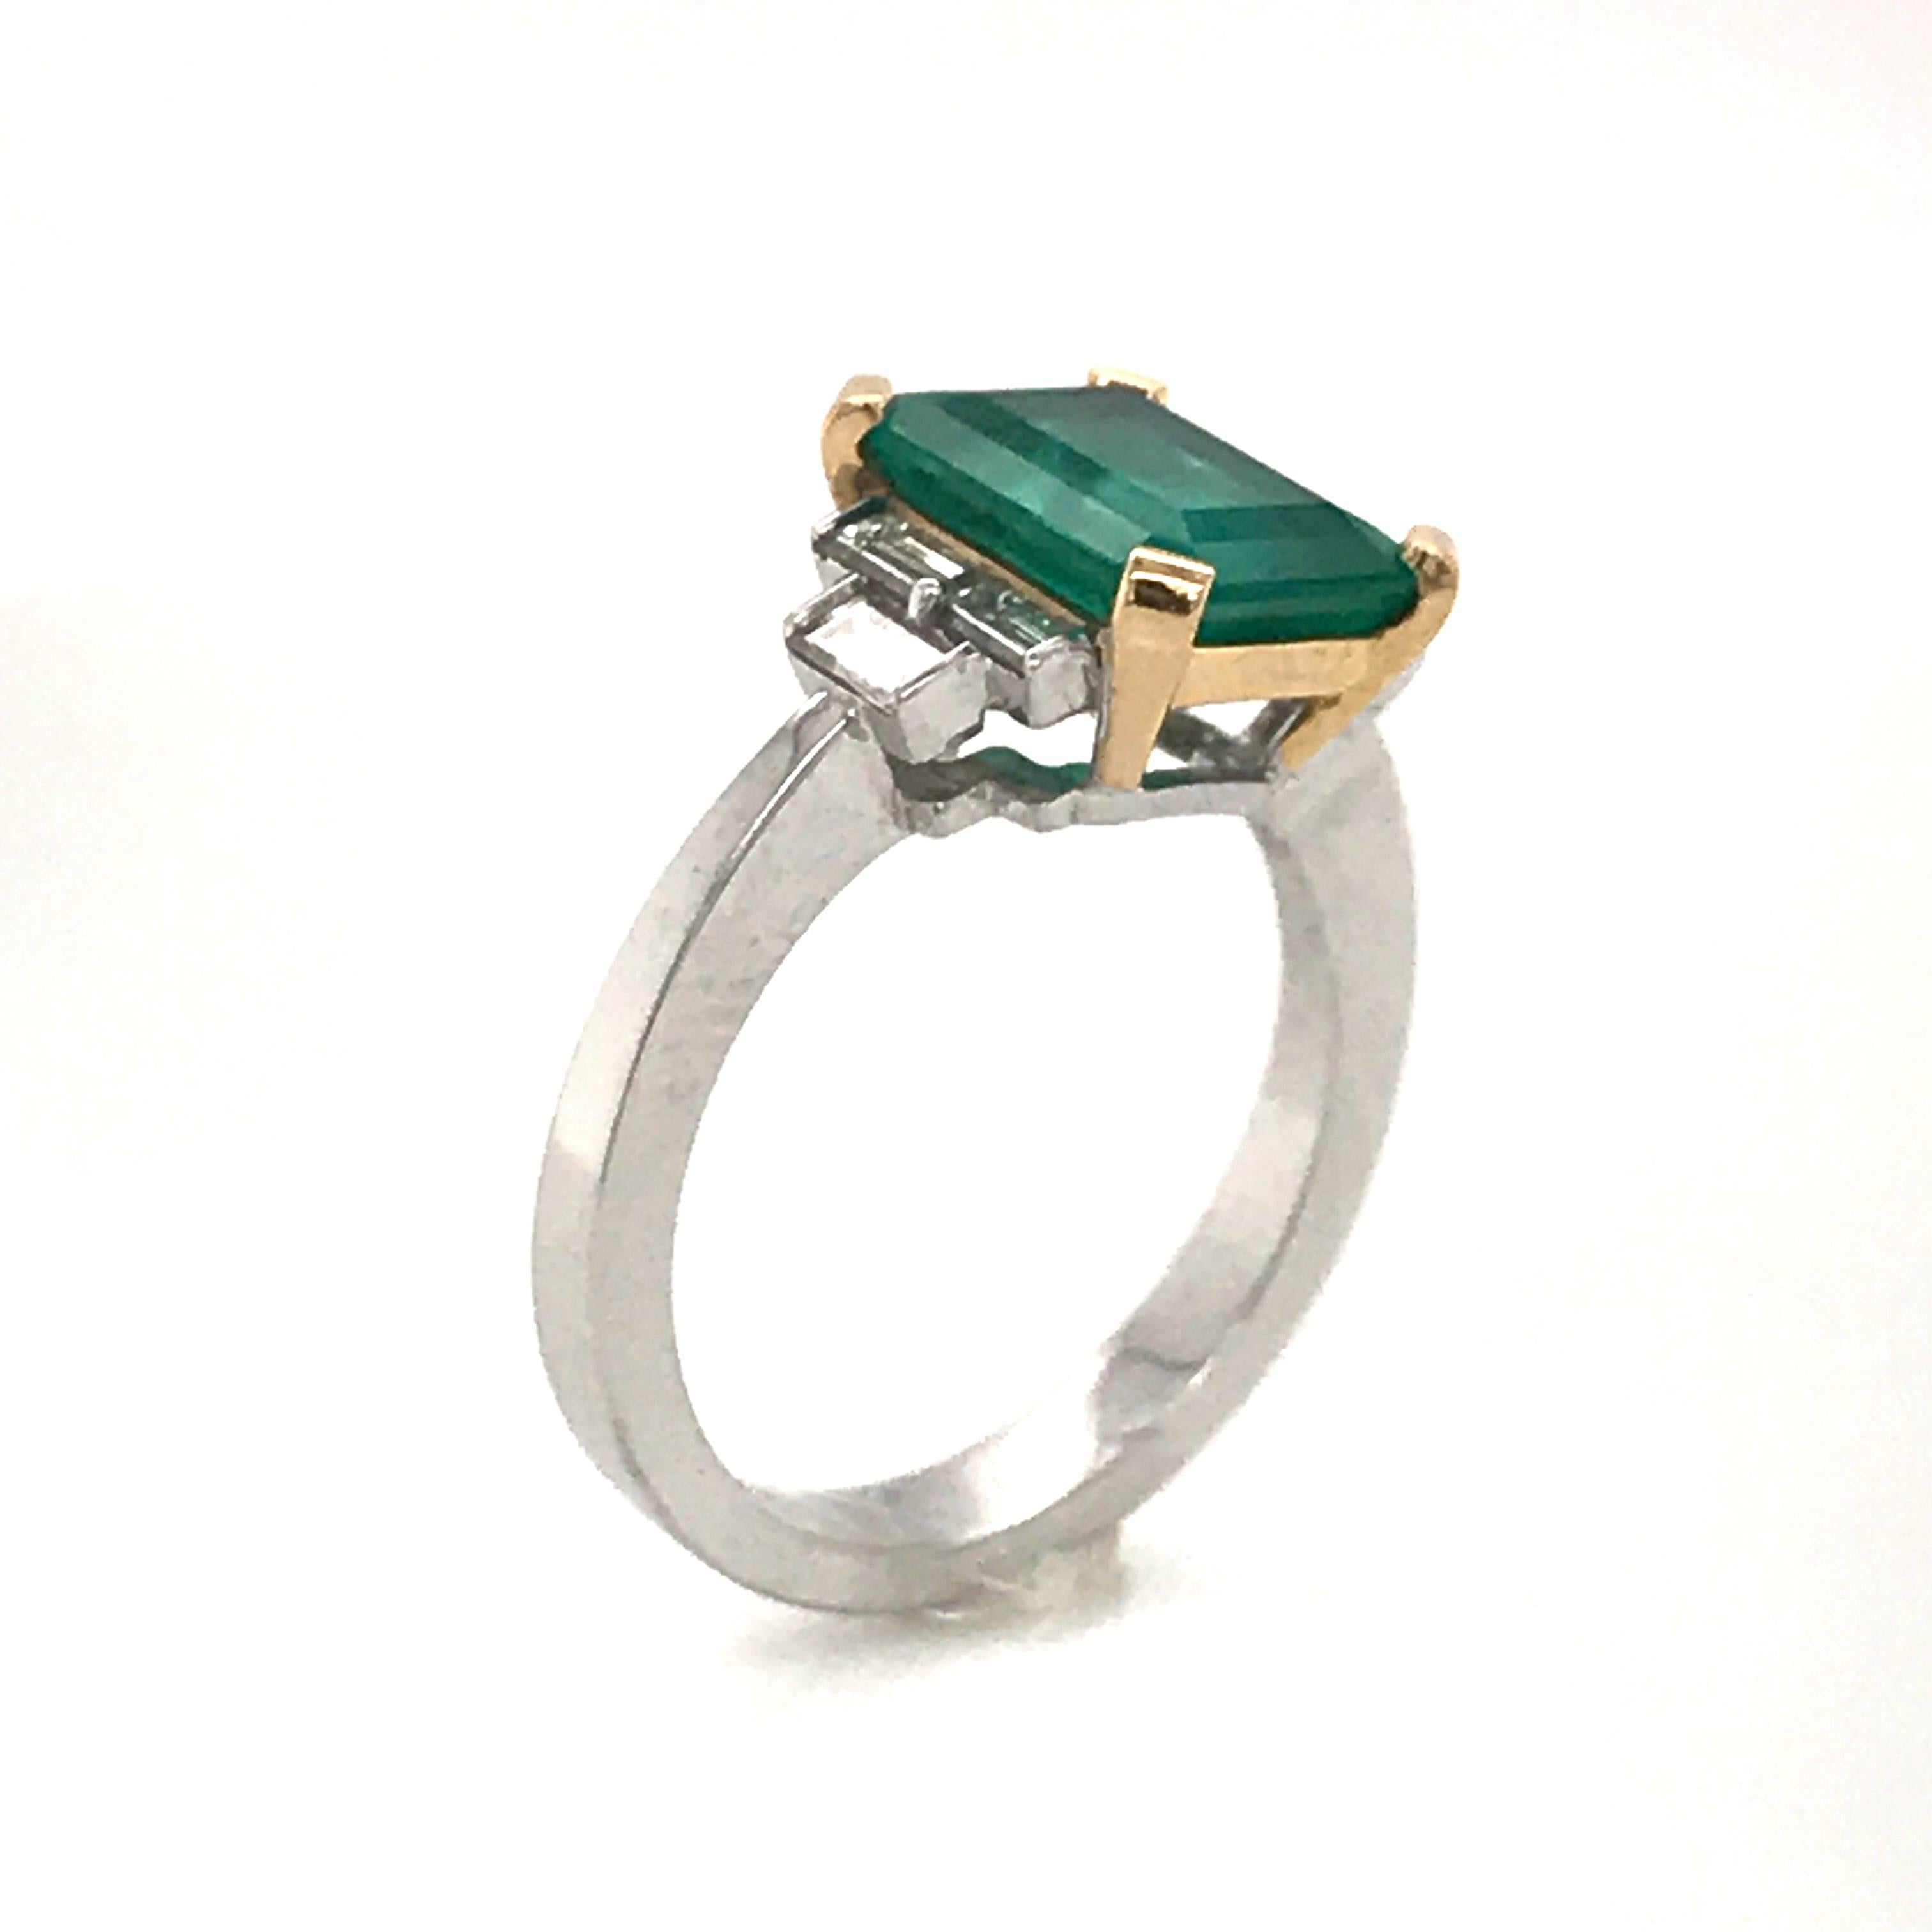 Certified Emerald 2.68 Karat White Diamonds on with Gold Engagement Ring 5